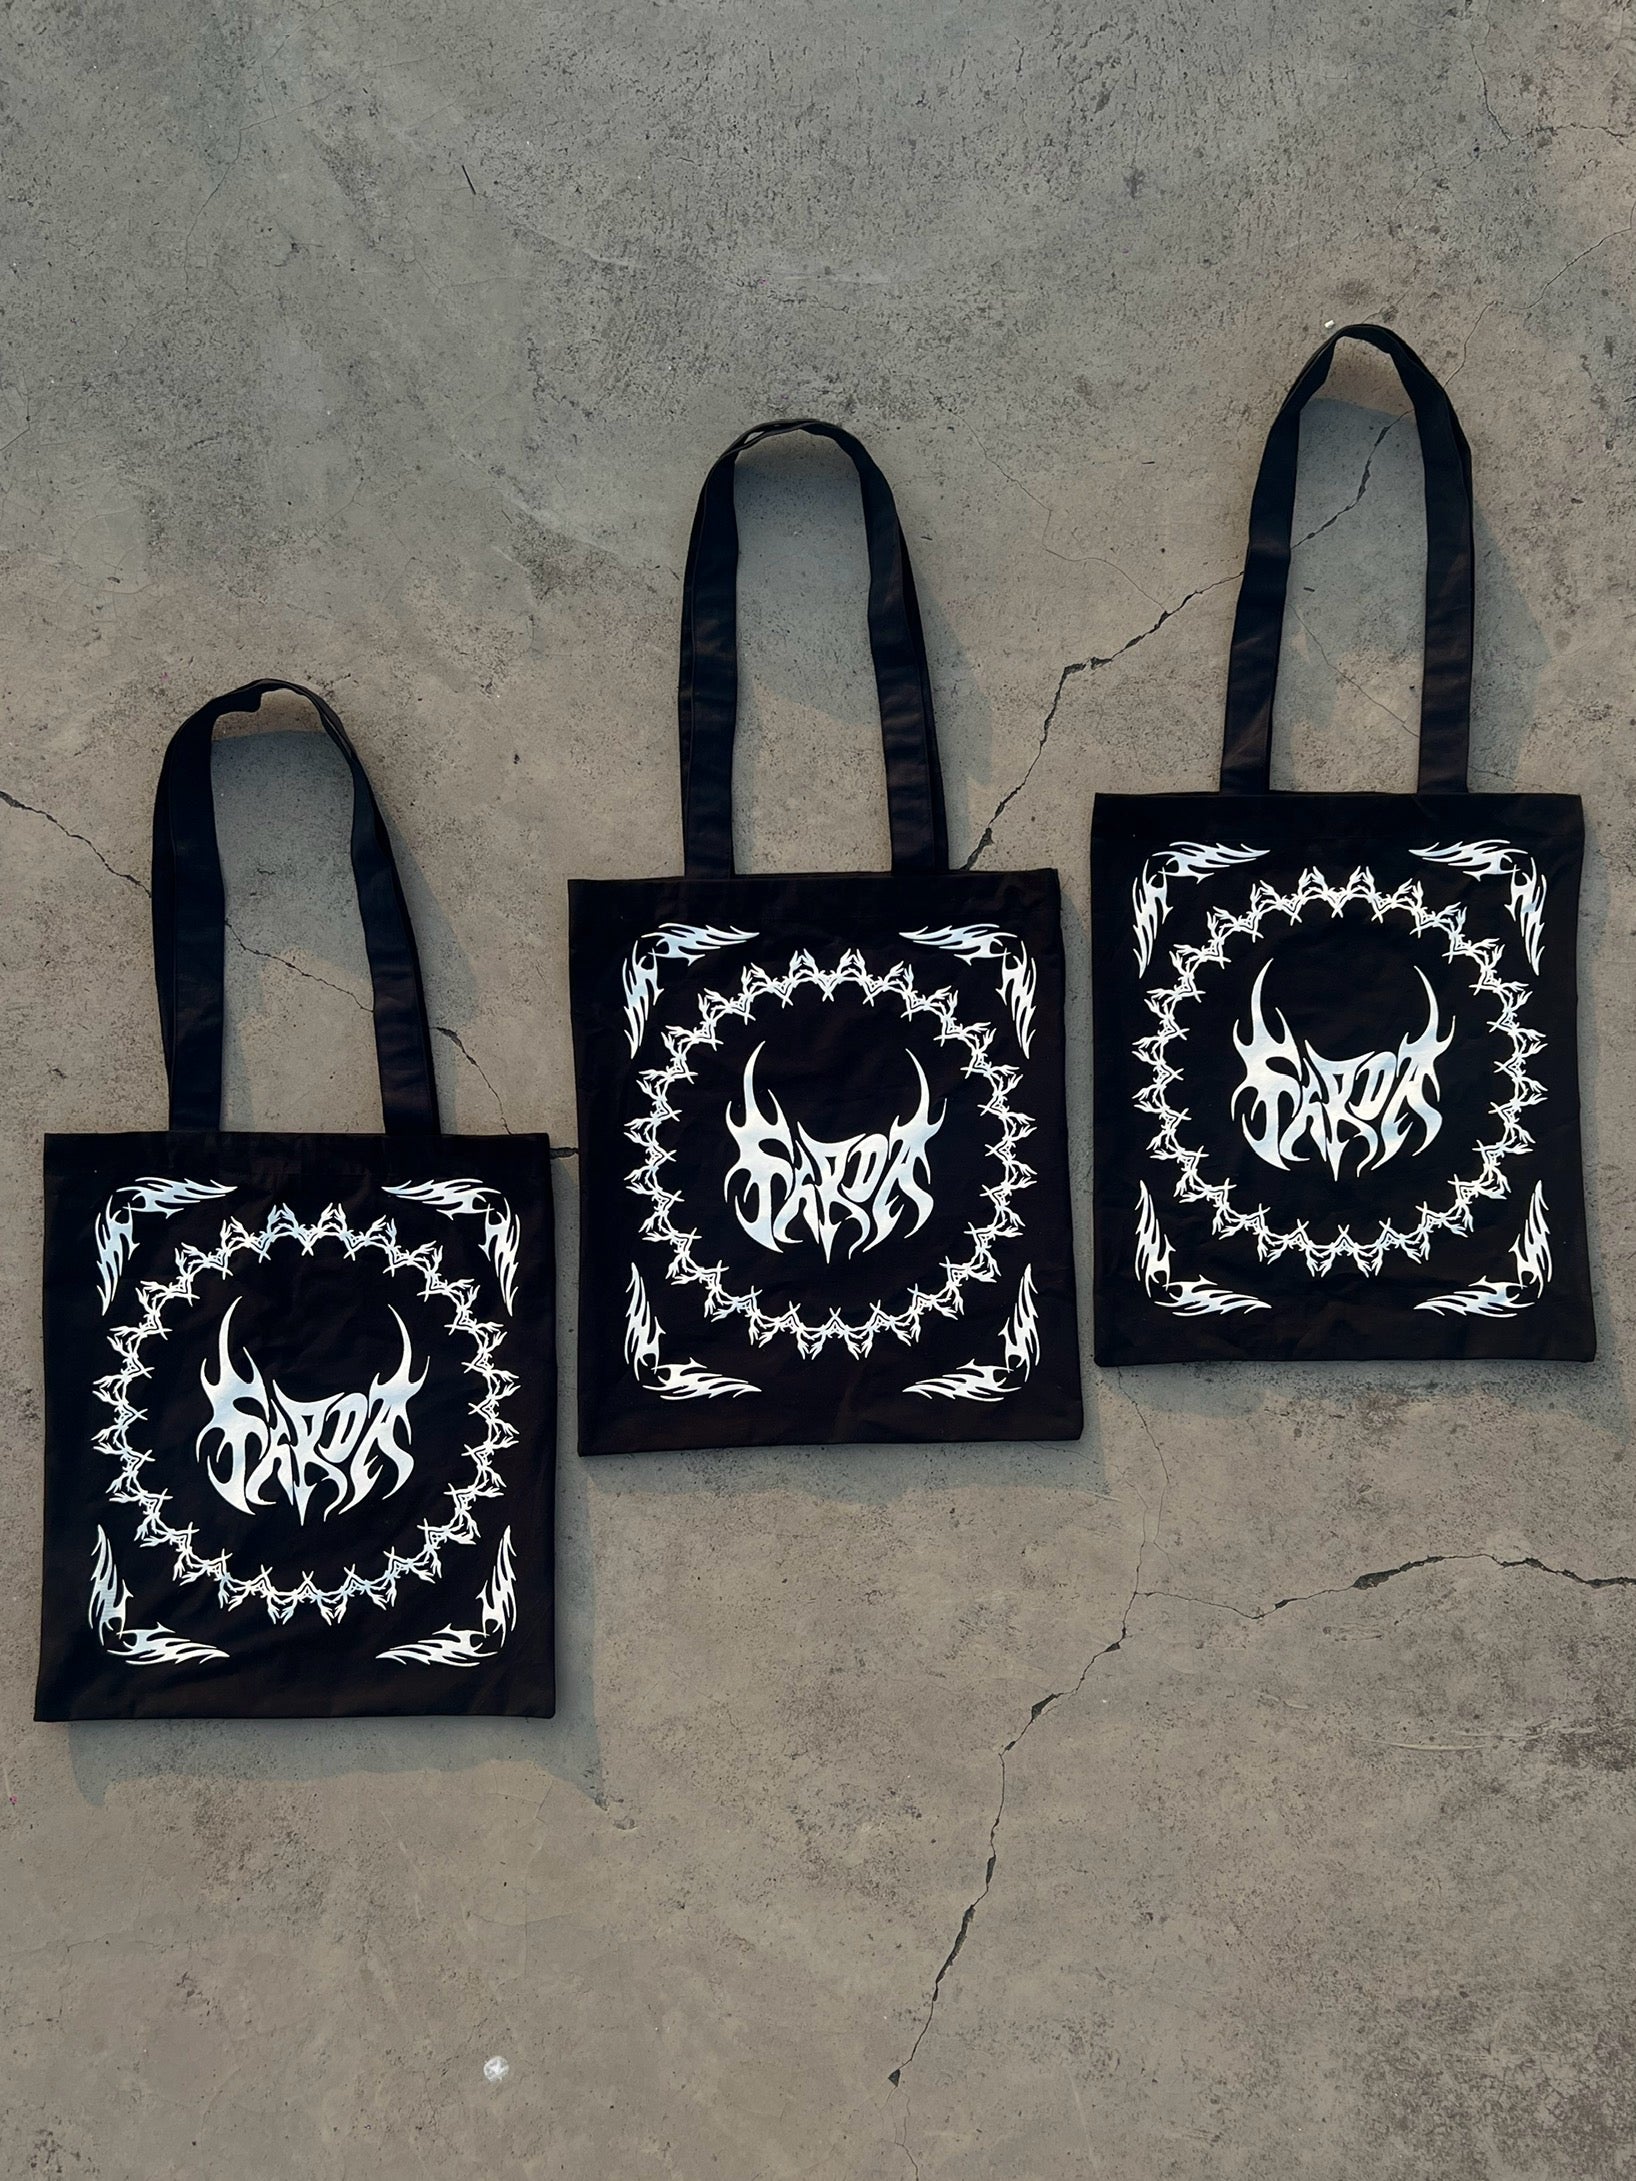 NEO TRIBAL TOTE BAGS (50 PIECES ONLY)